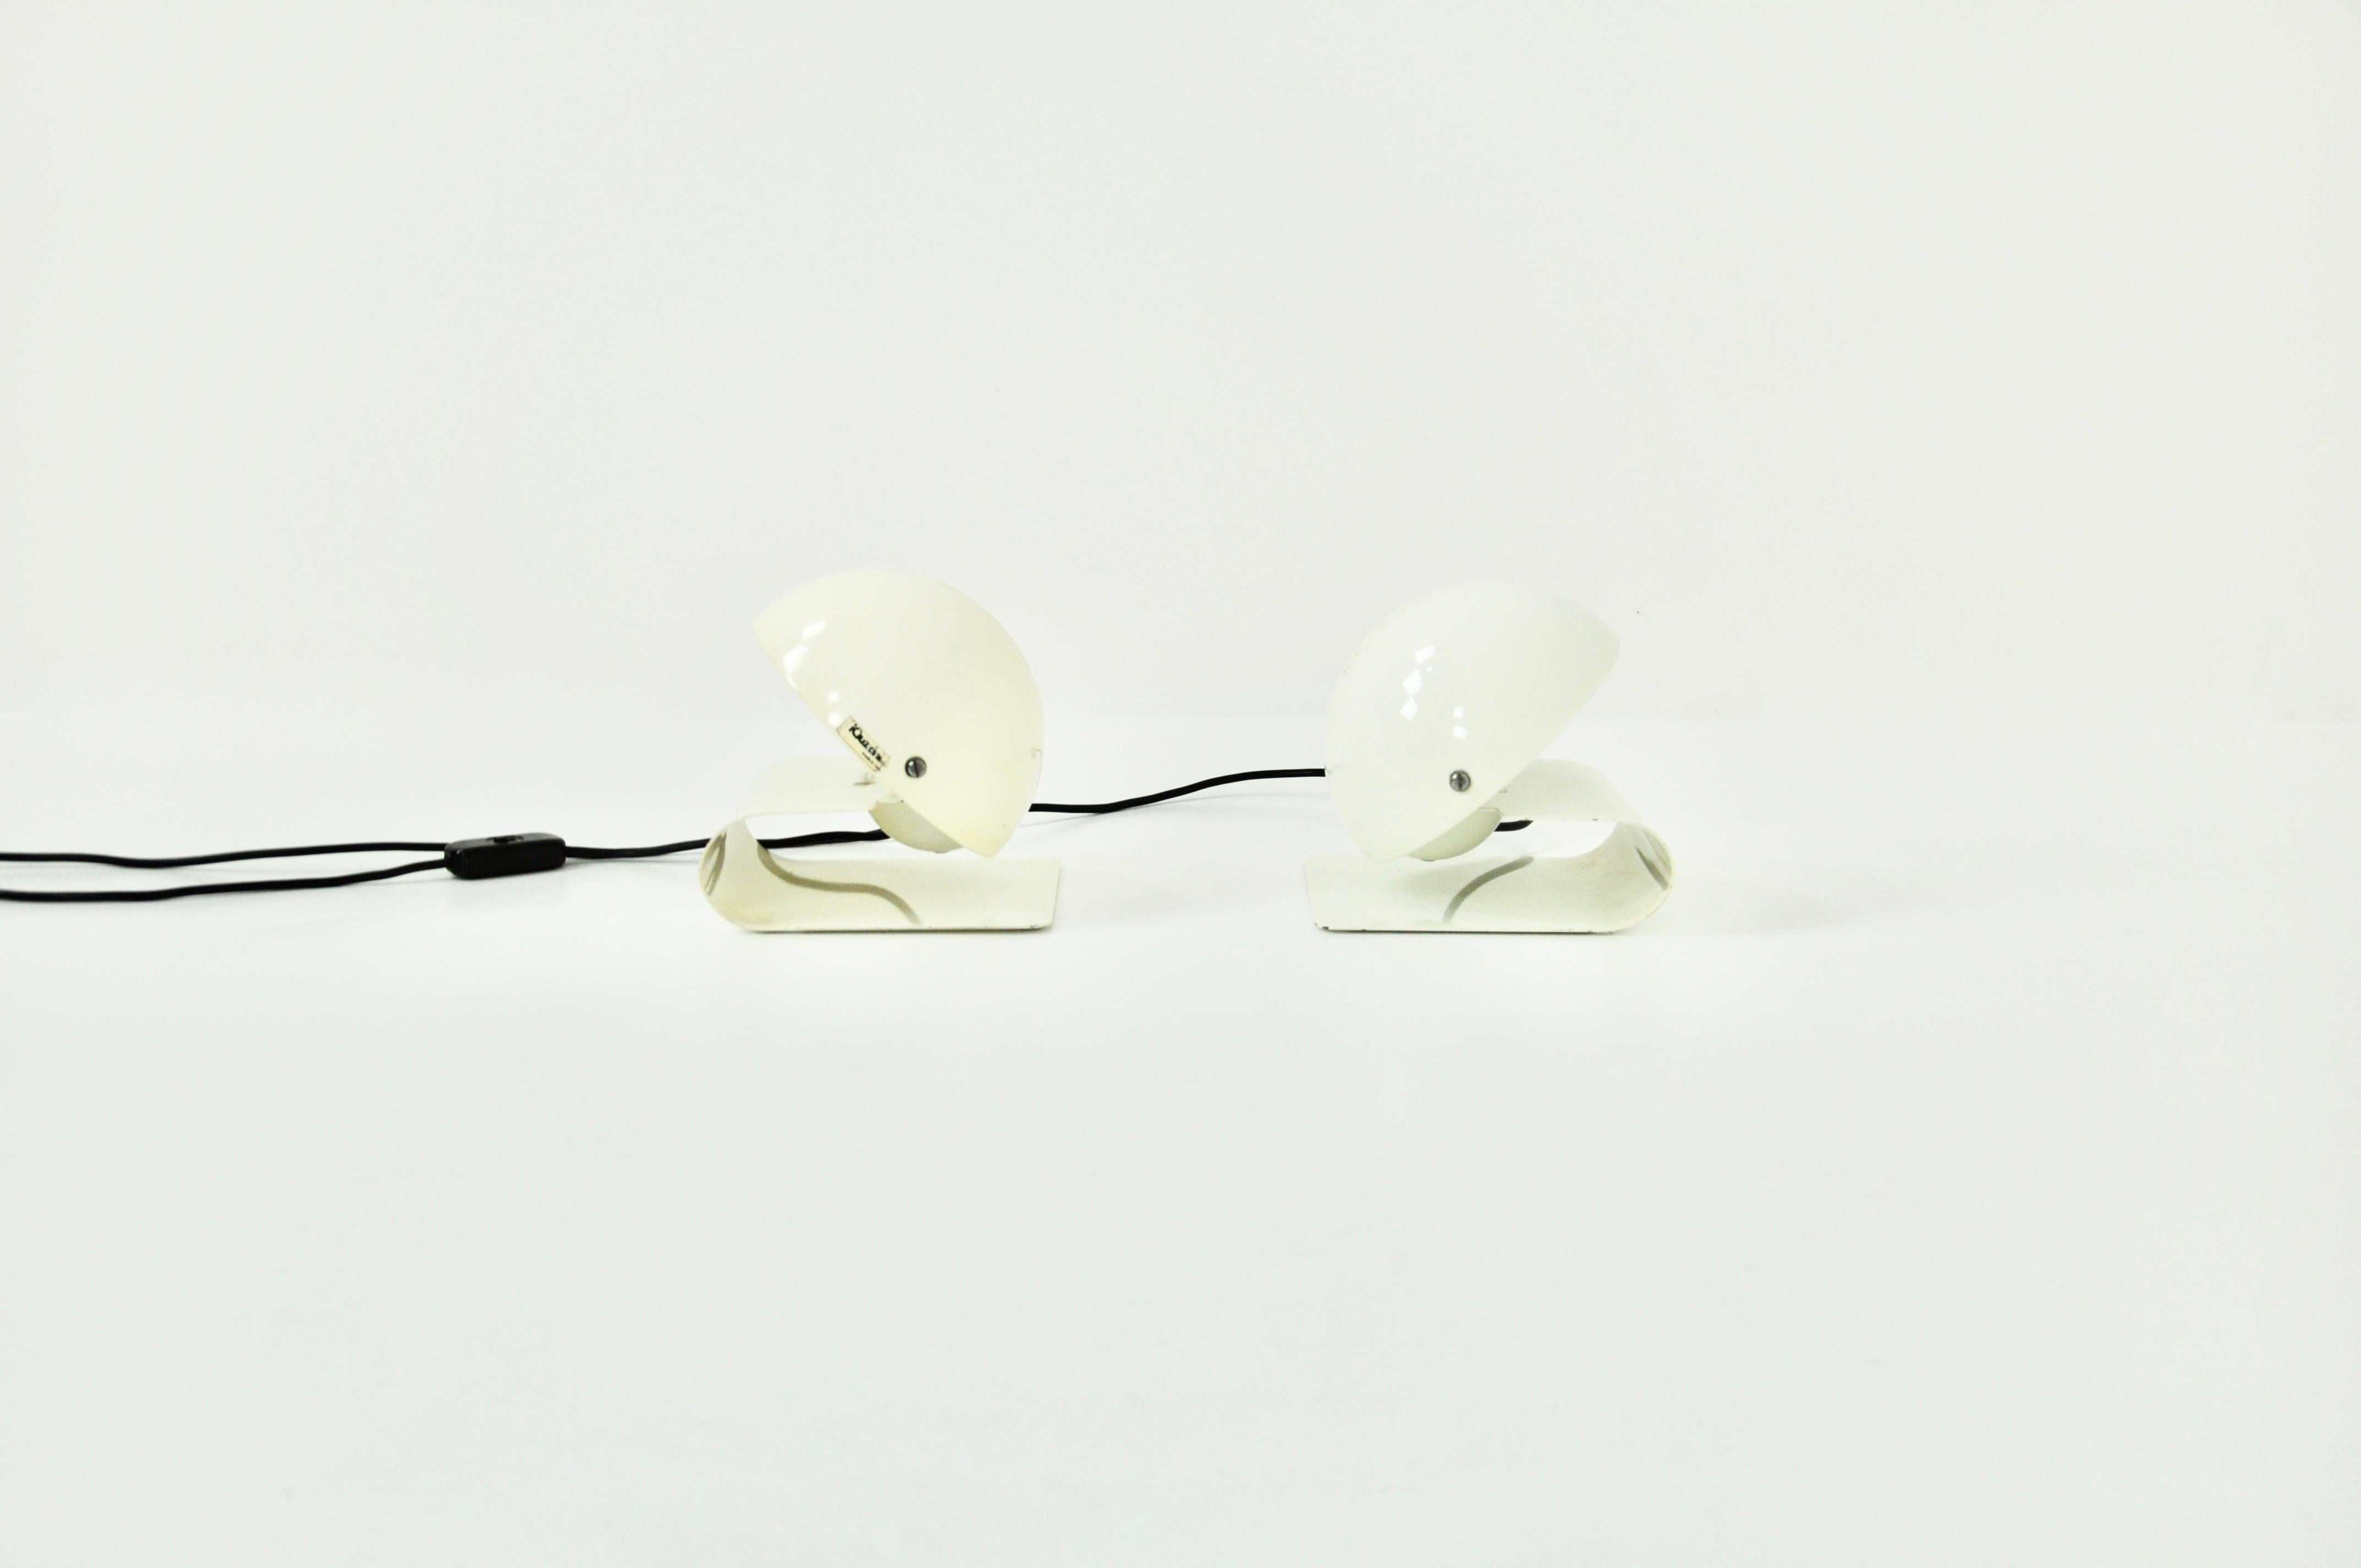 Pair of white color lamp. Stamped IGUZZINI. Wear due to time and the age of the lamp.